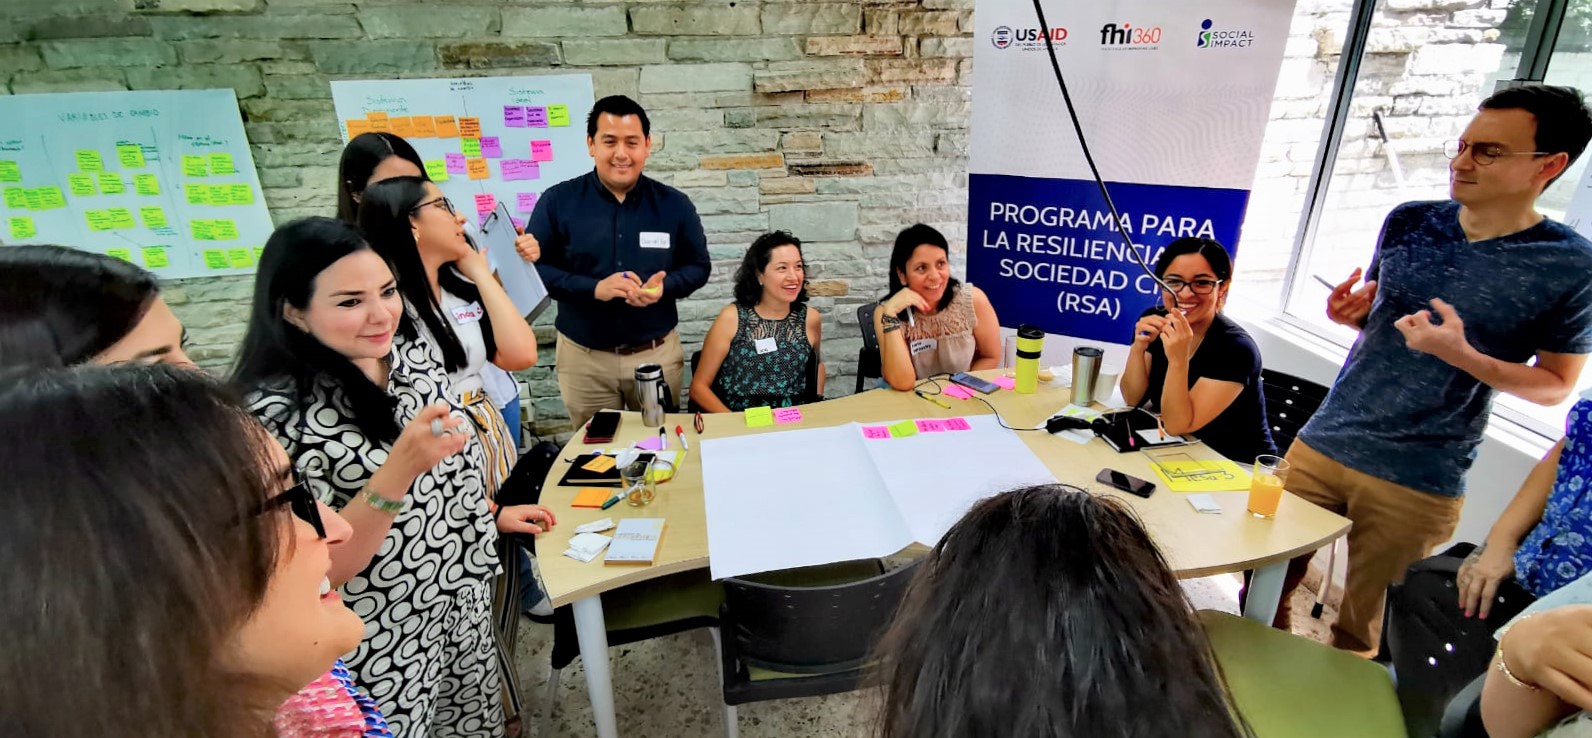 Strengthening the Learning and Practice Networks Through Mexico’s “TELAR”